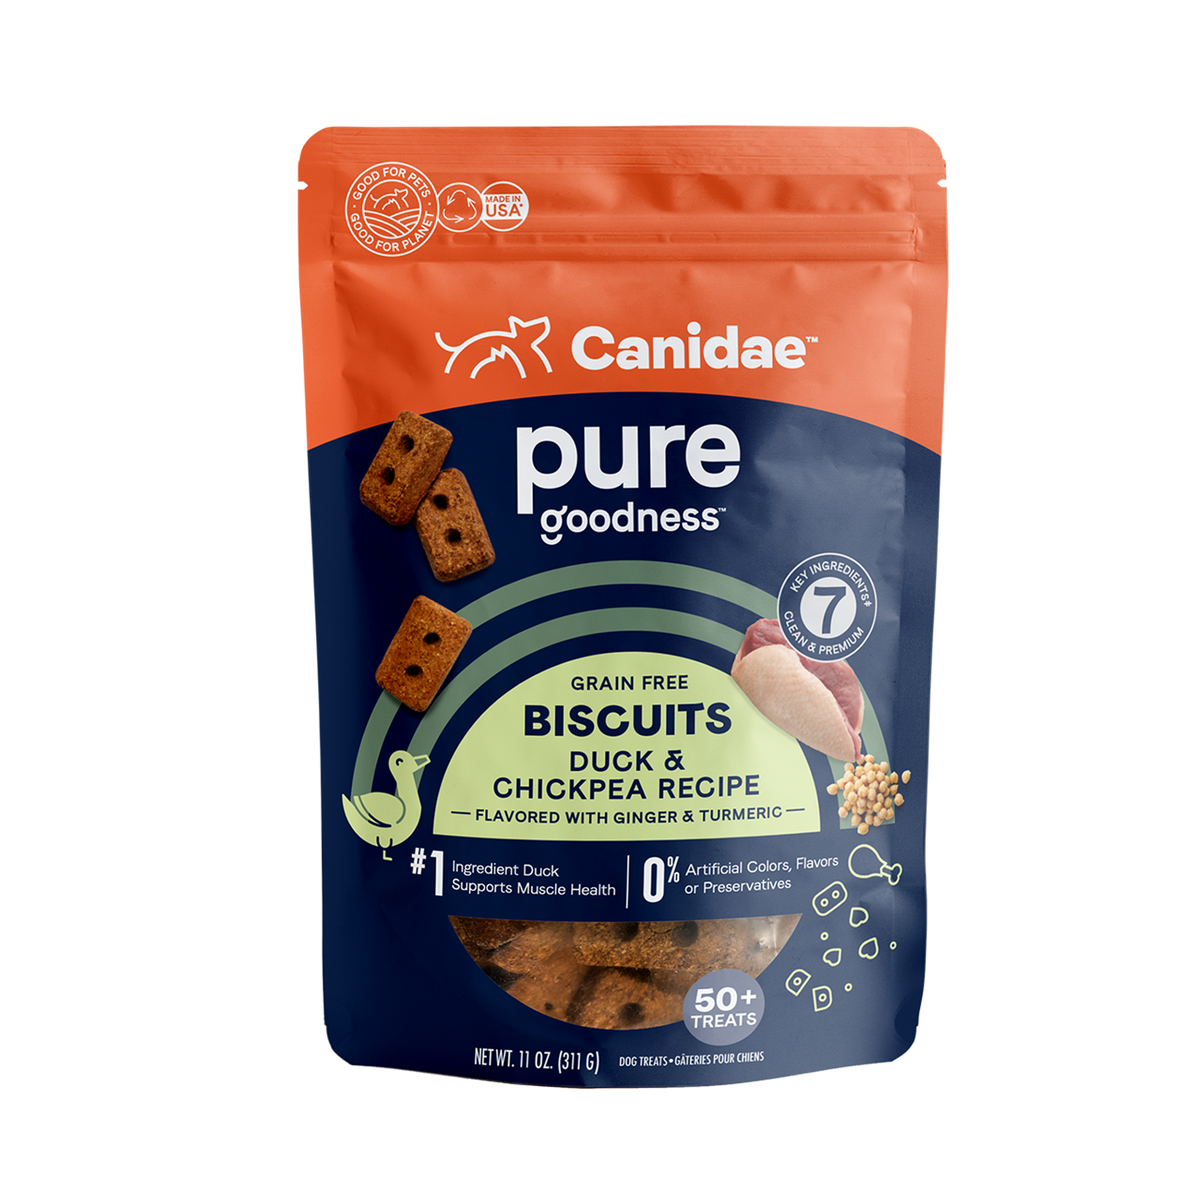 Canidae - Grain-Free Pure Heaven Biscuits with Duck & Chickpeas Crunchy Dog Treats